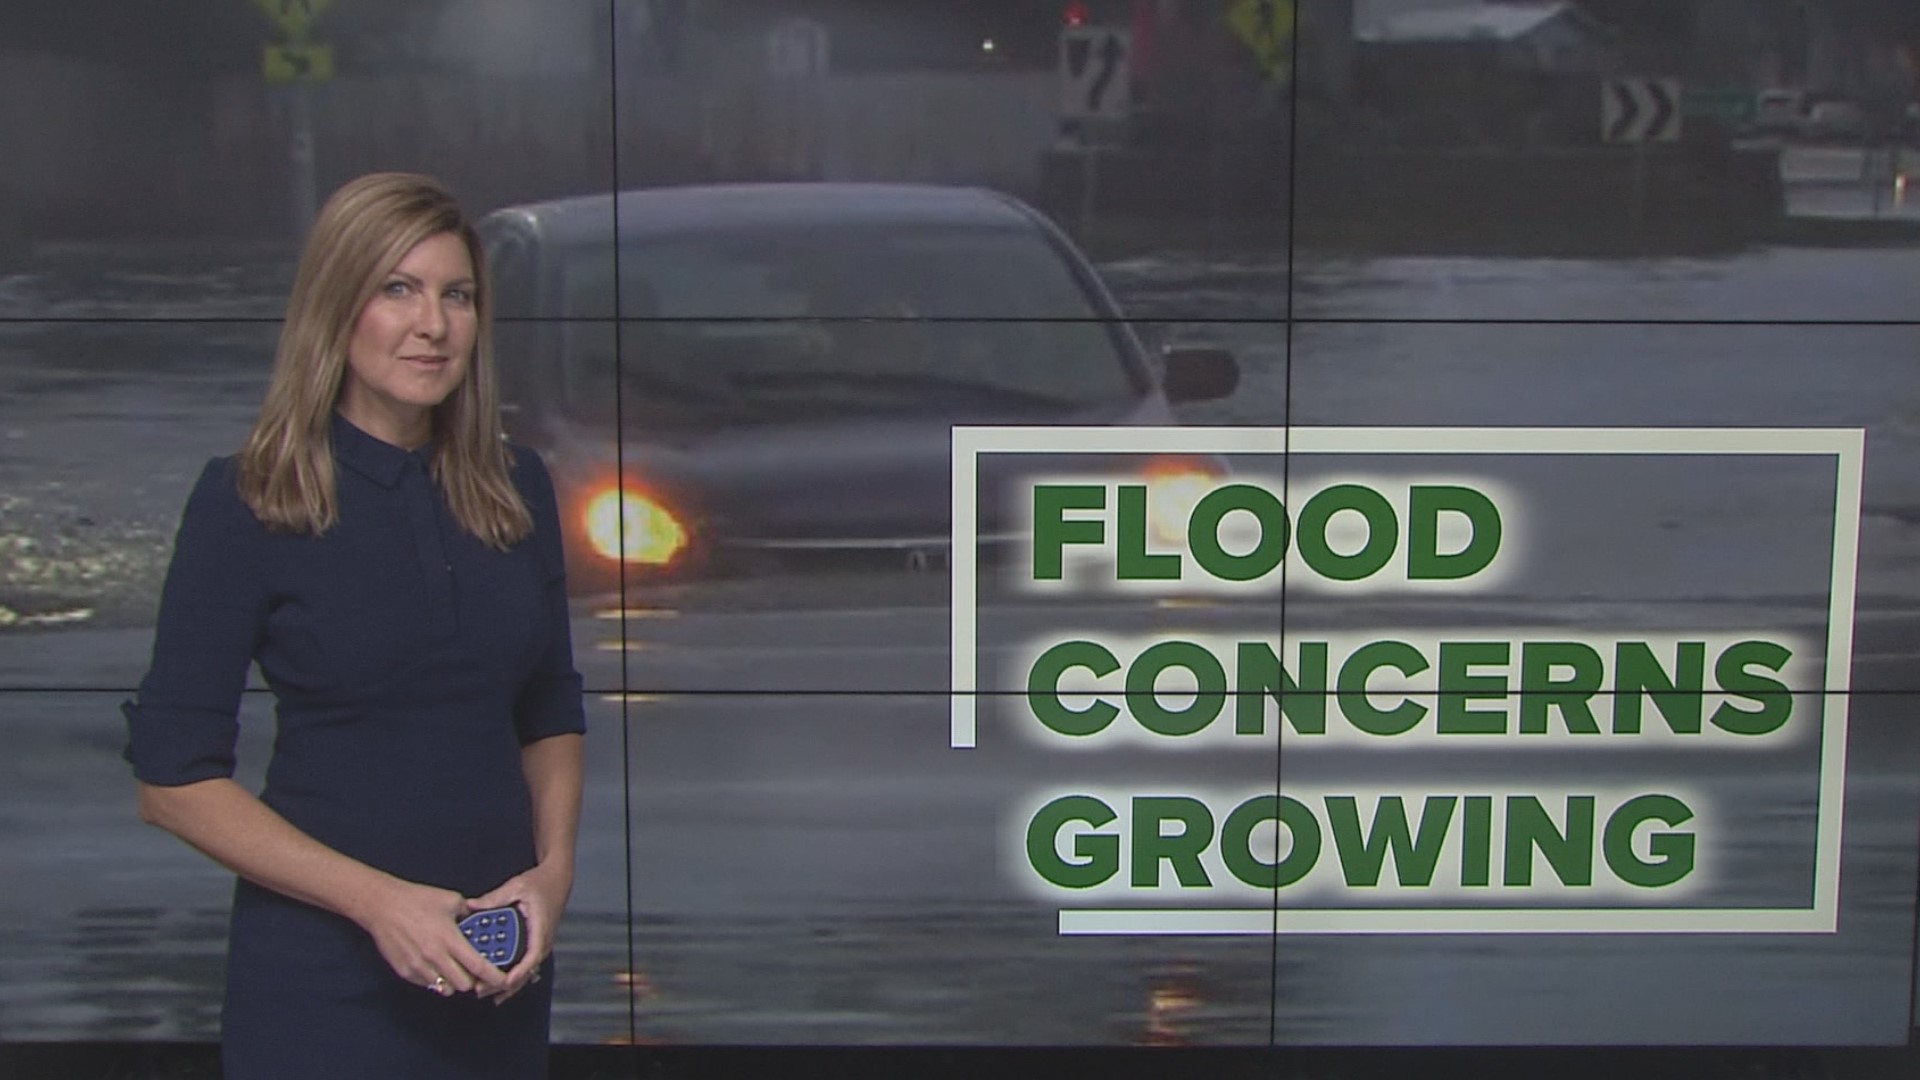 A dangerous weather pattern is developing for Northern California as a powerful atmospheric river brings big flood concerns.